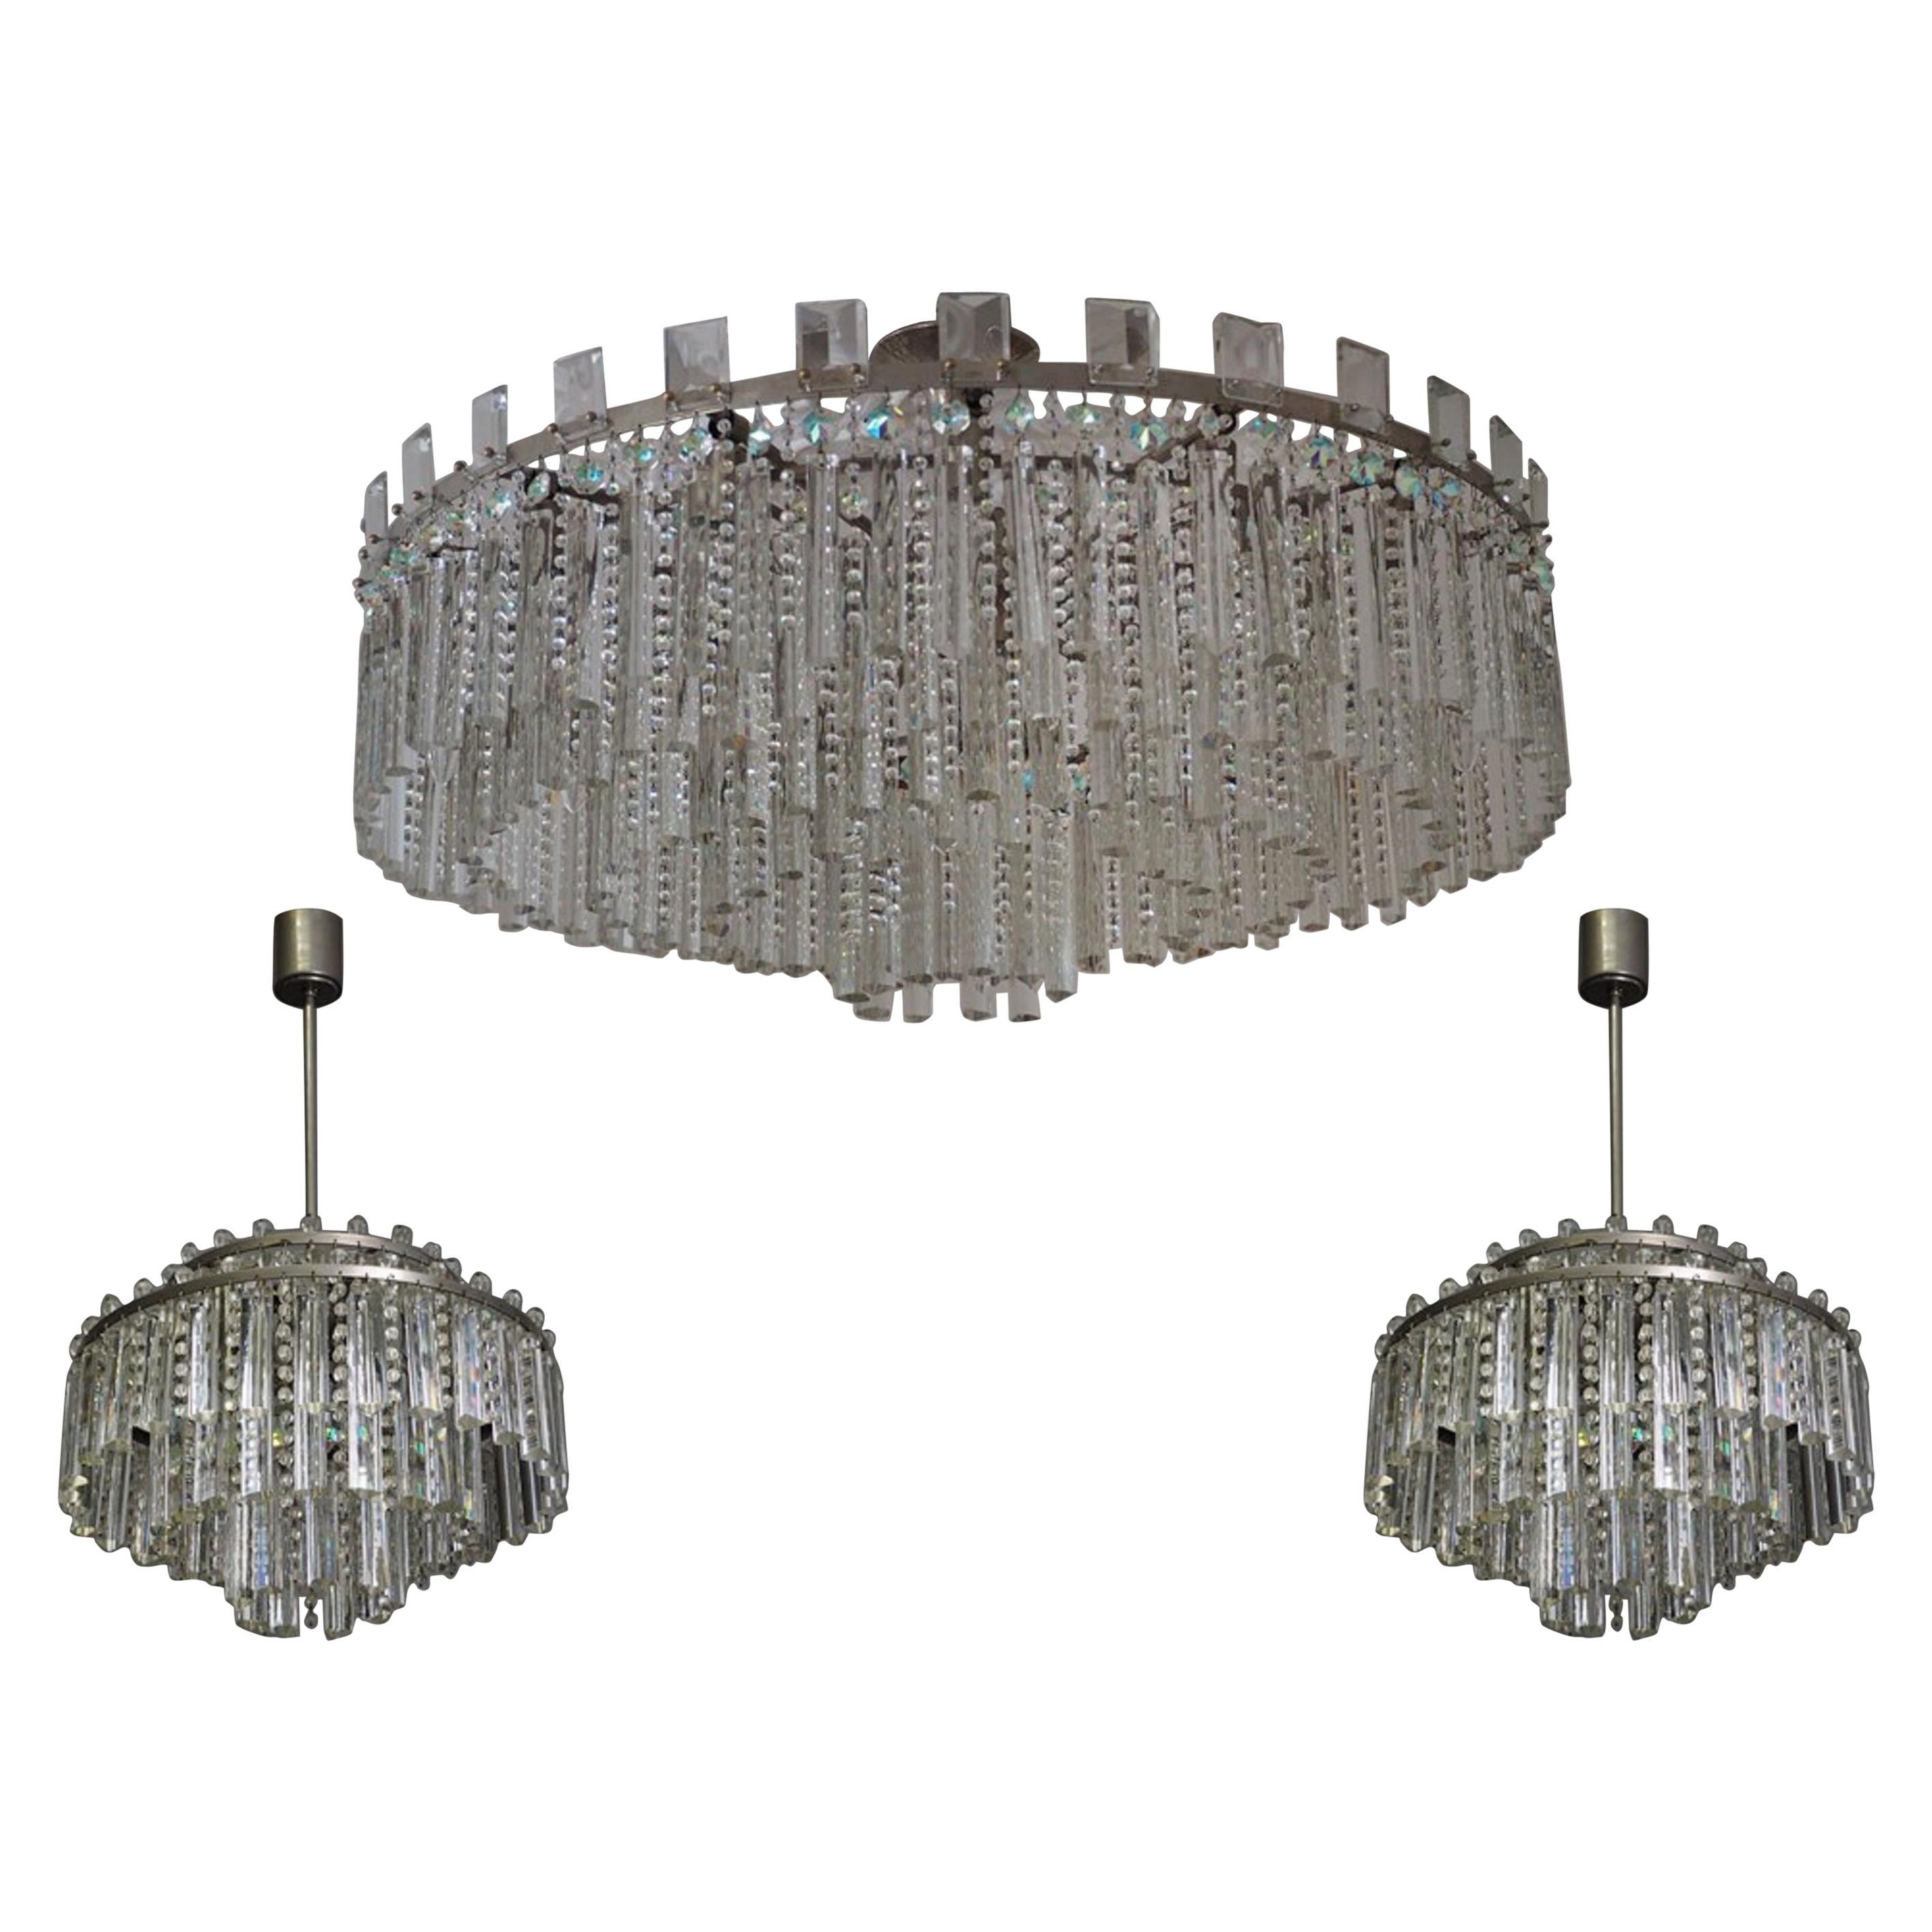 Stunning Set of Haevy Cut Glass and Nickel Chandeliers by Palwa, circa 1960s For Sale